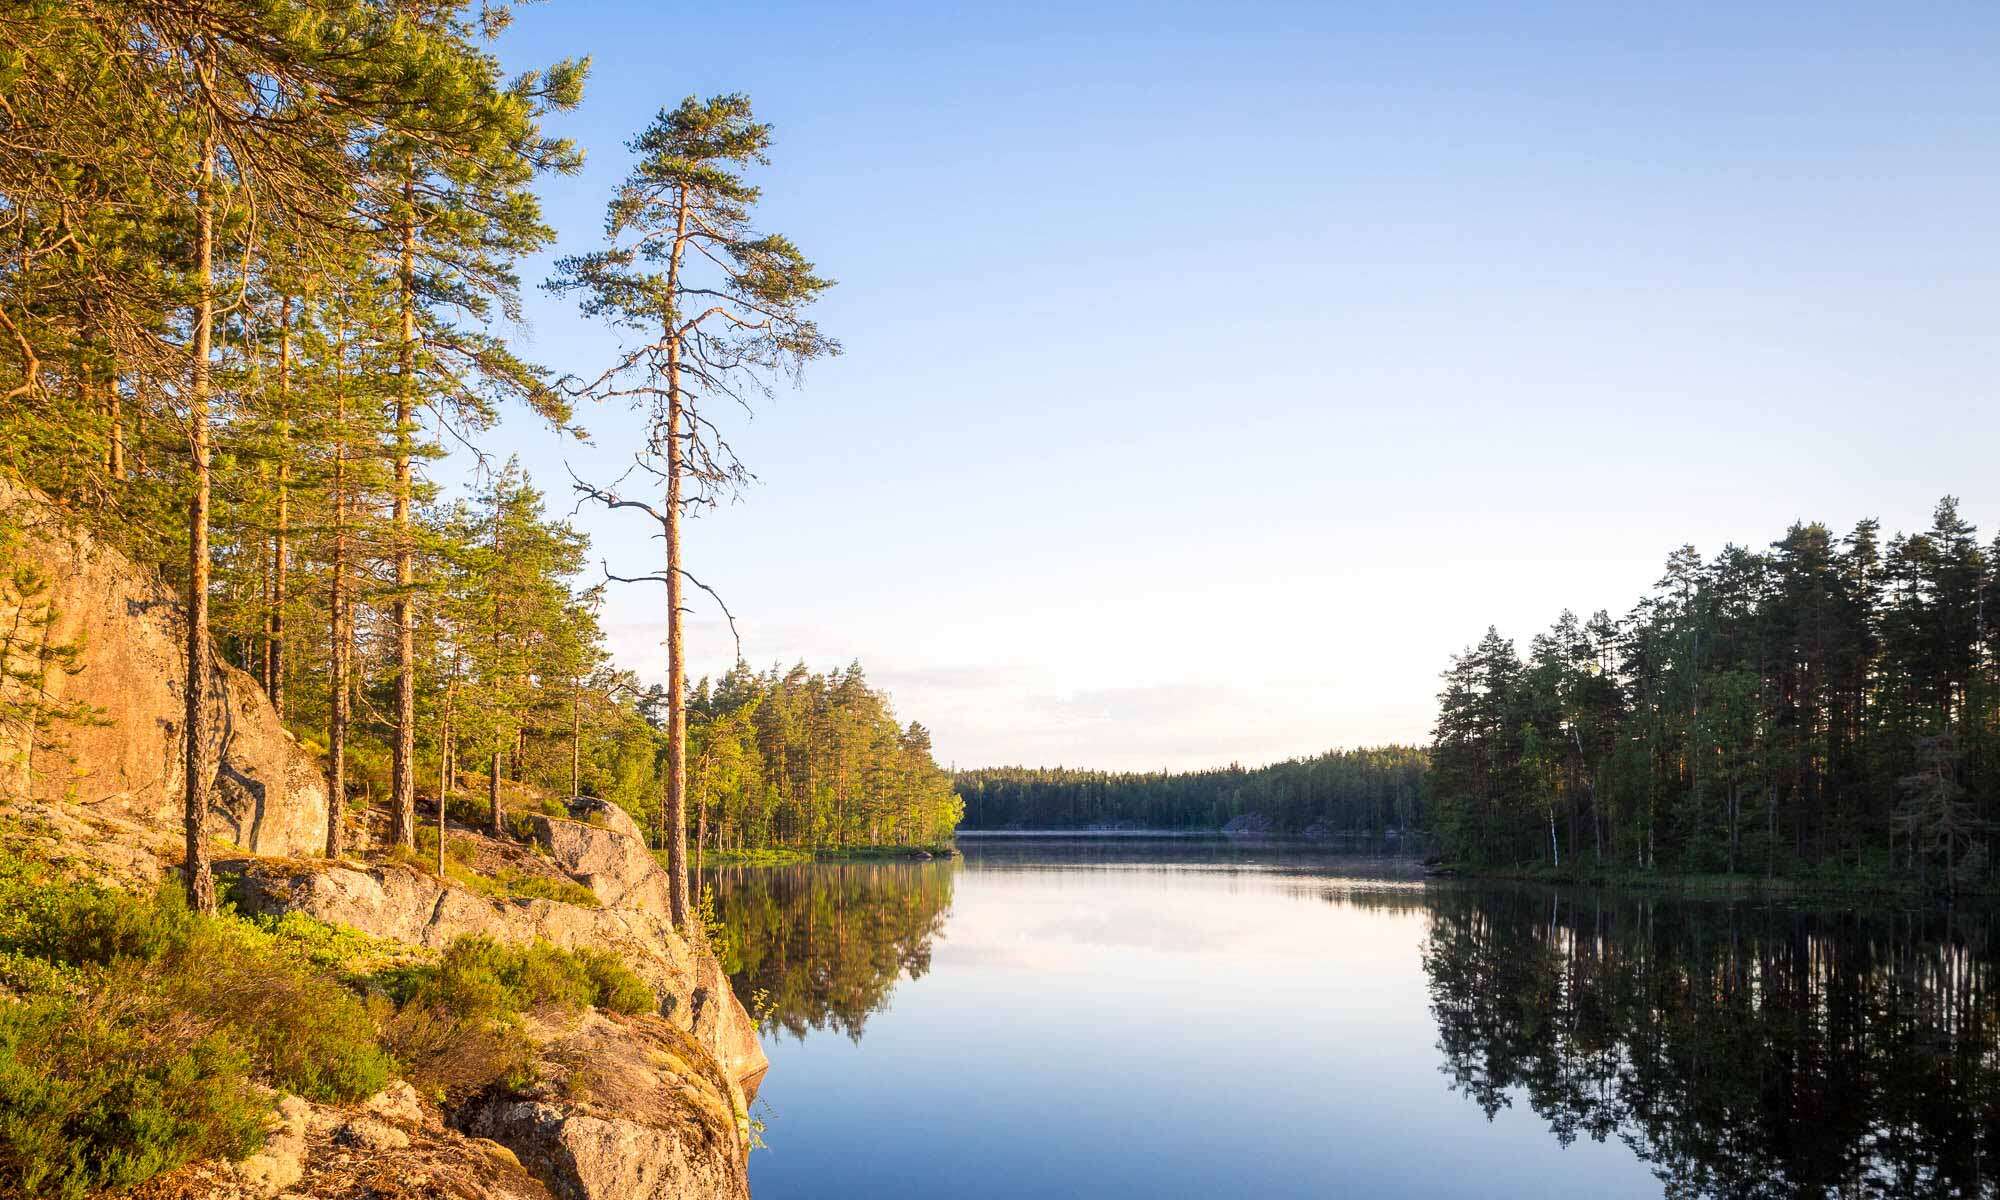 Nuuksio National Park in summer, in June. Summer in Finland is clear lakes and forests. Finnish nature near Helsinki, Finland.